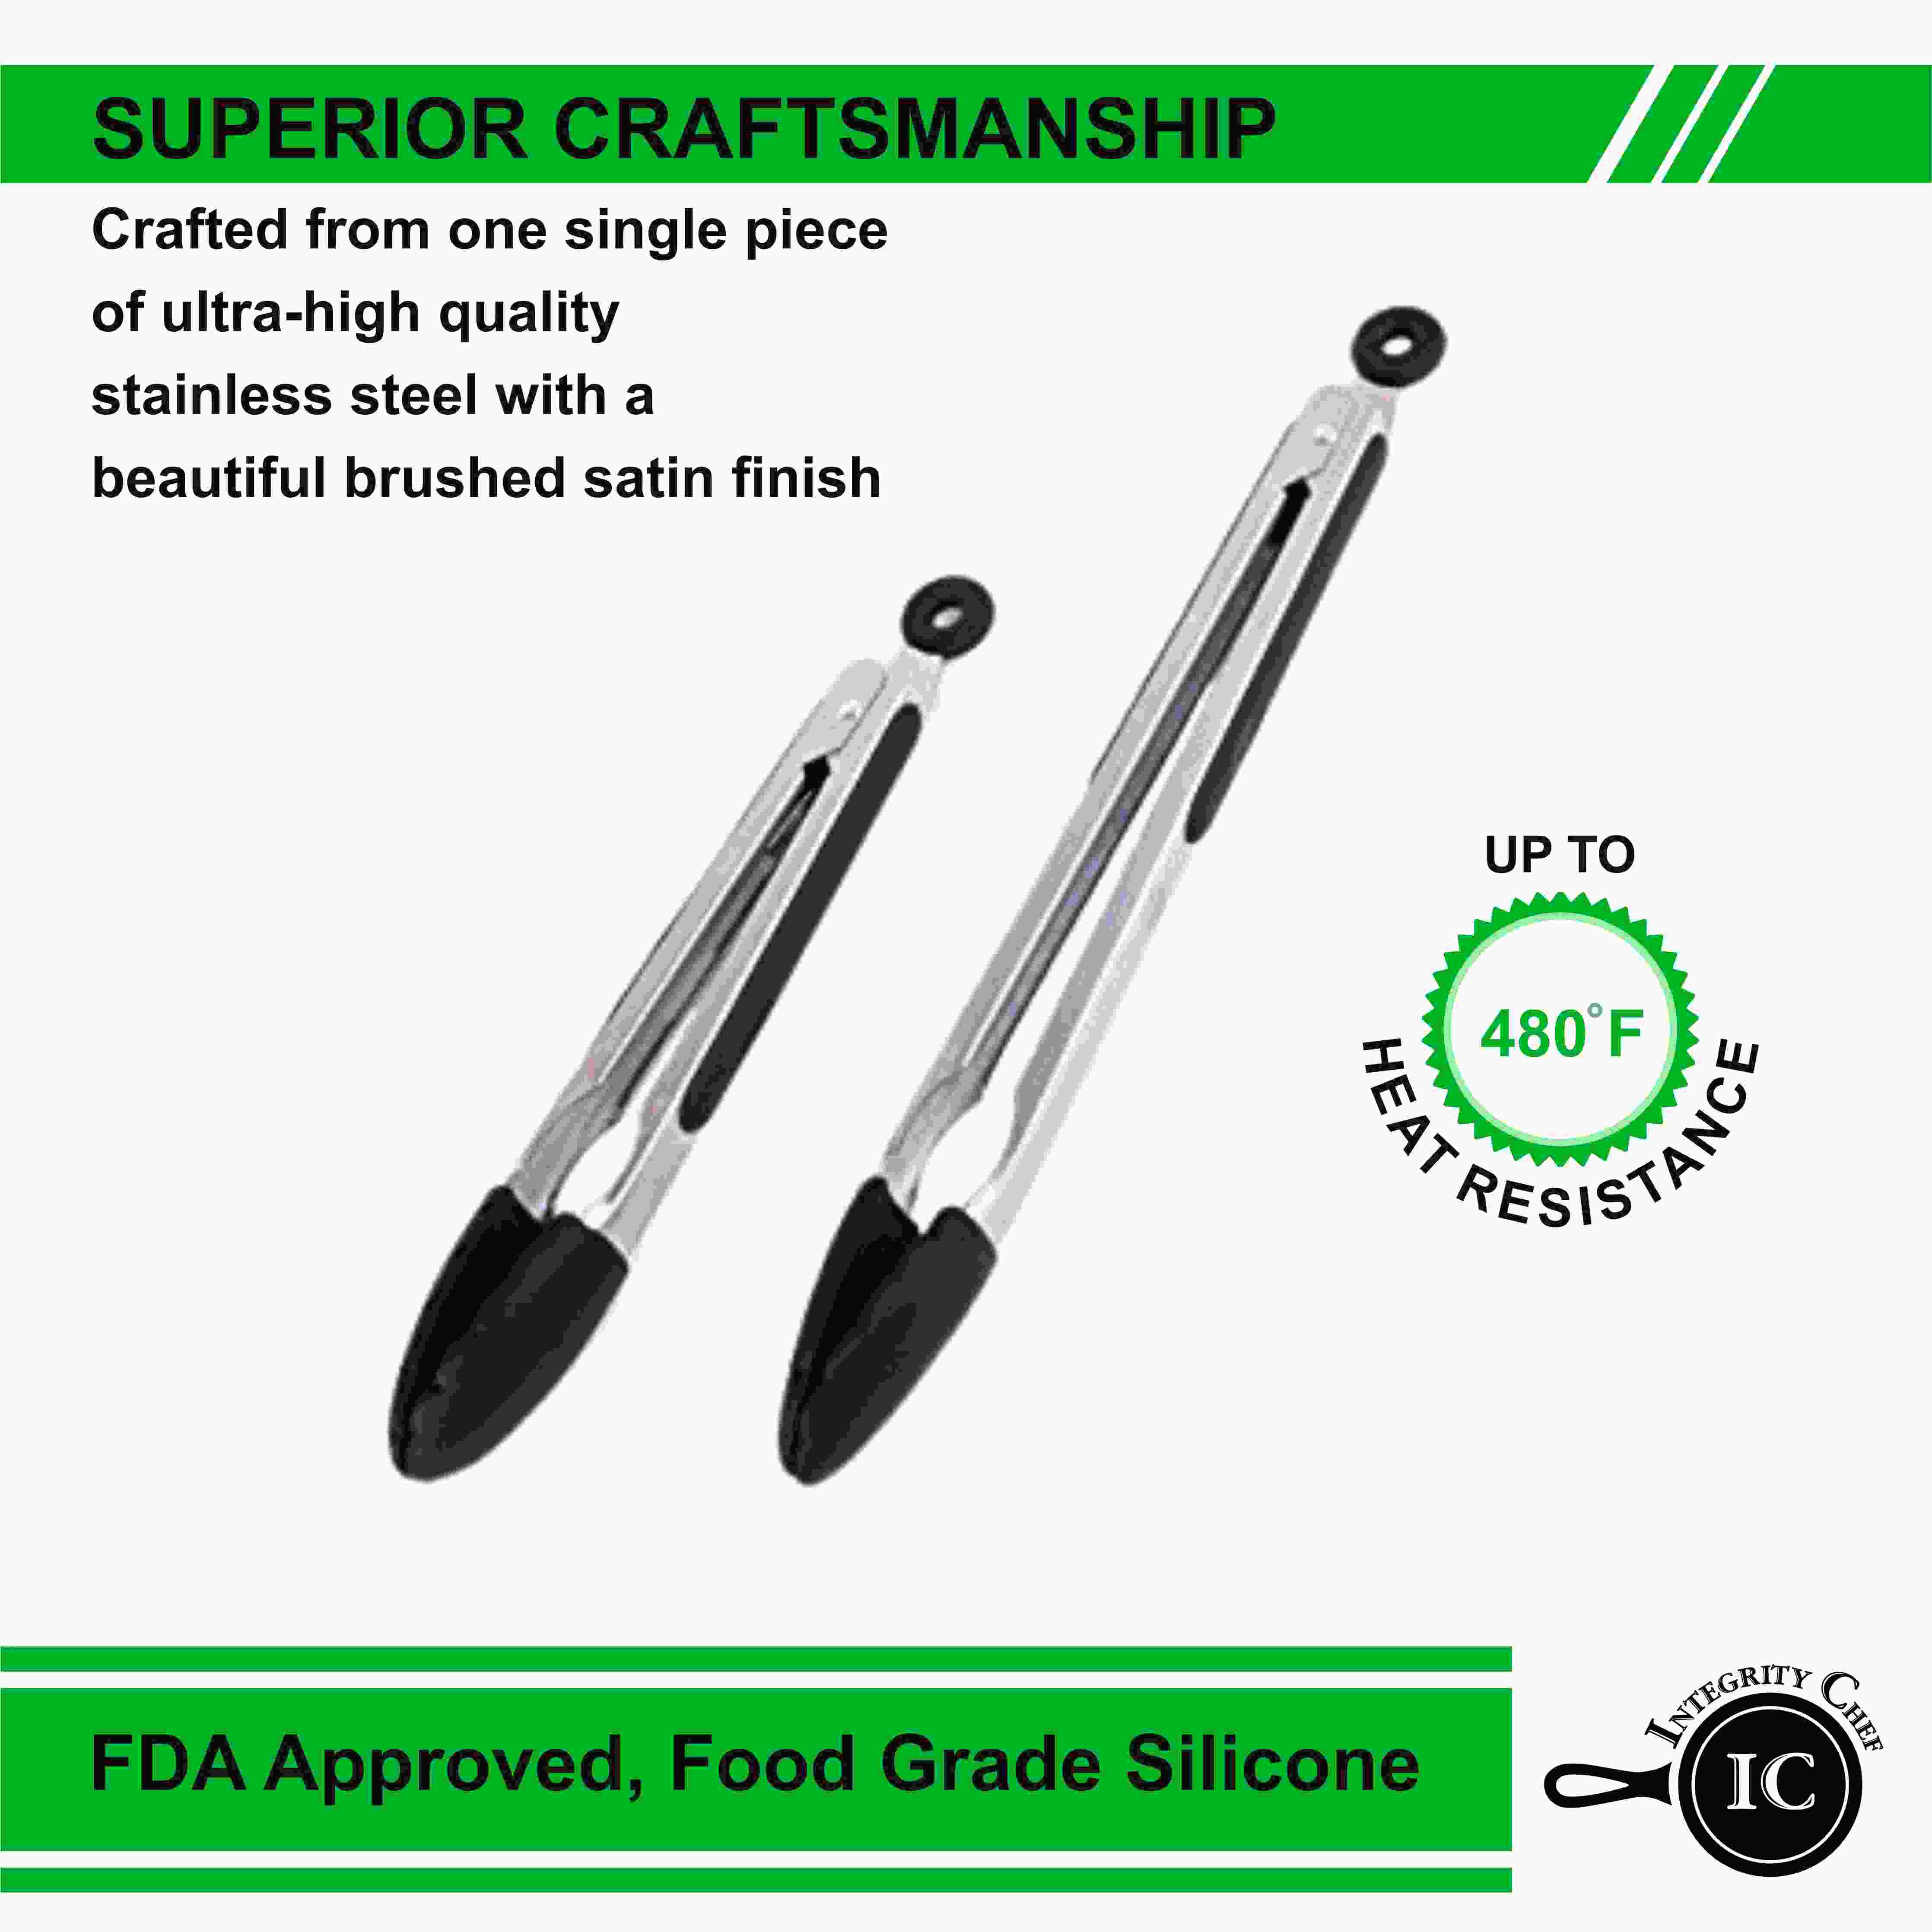 Premium Stainless Steel Kitchen Tongs by Integrity Chef - Set of 2 (12